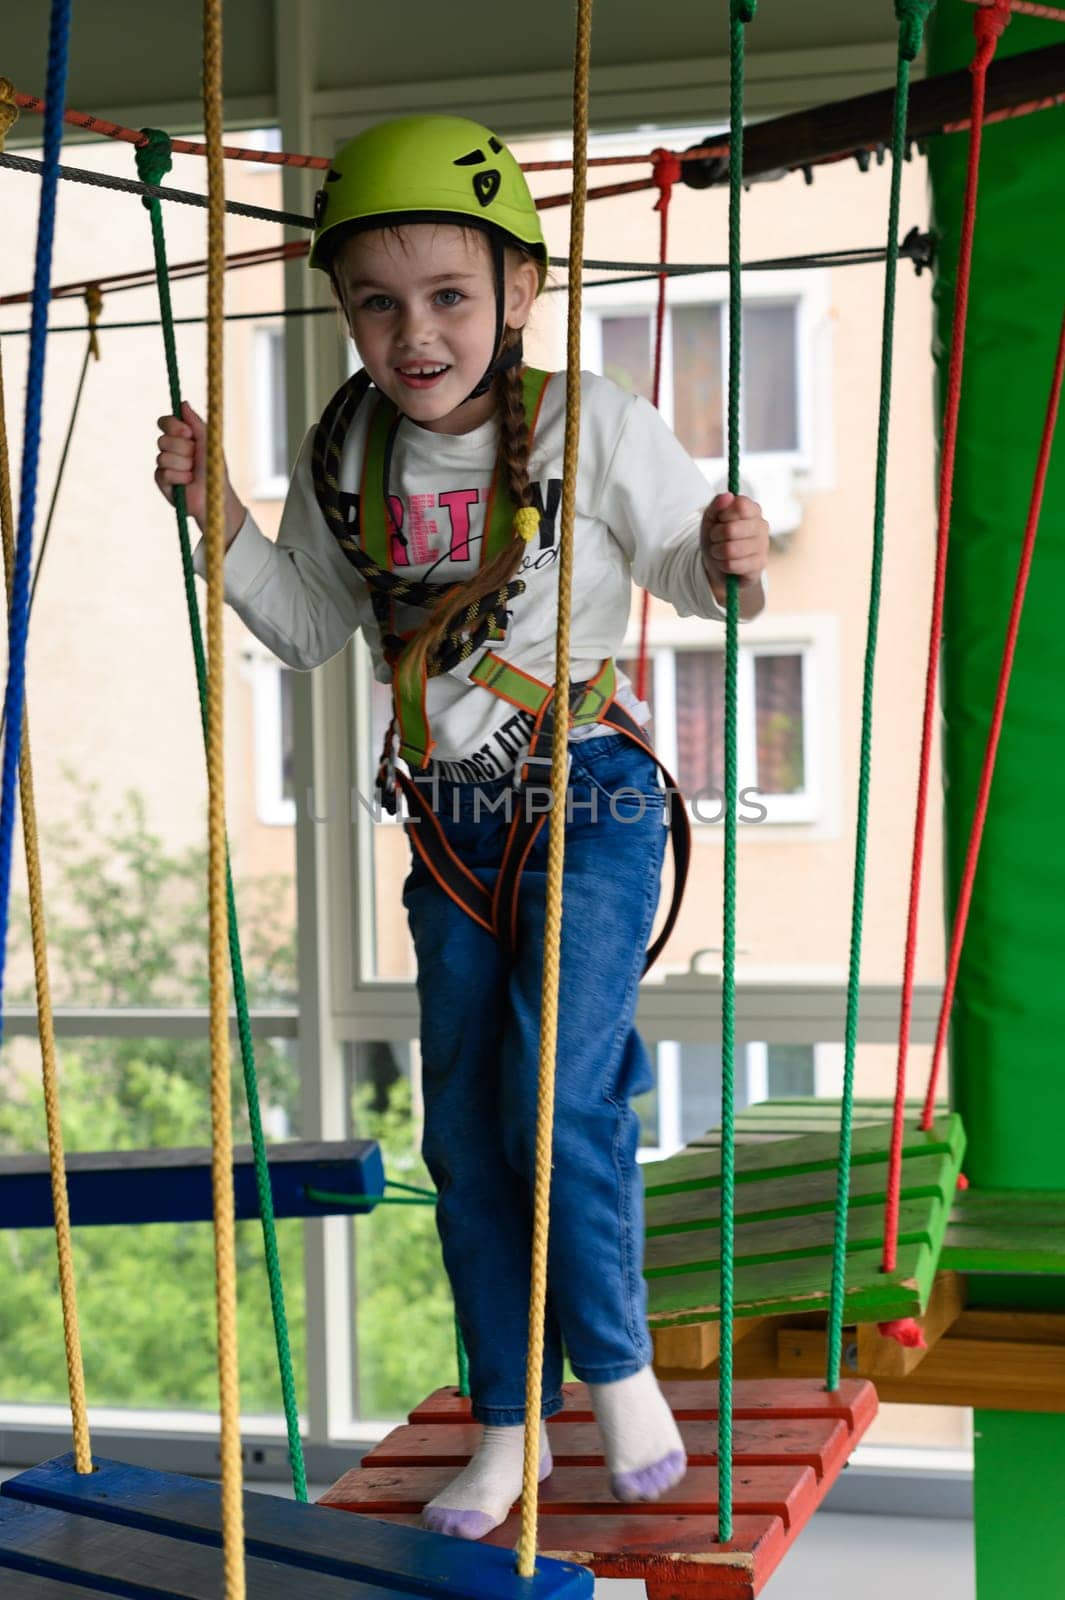 Children's cableway in the playroom, little girl passes the cableway. by Niko_Cingaryuk